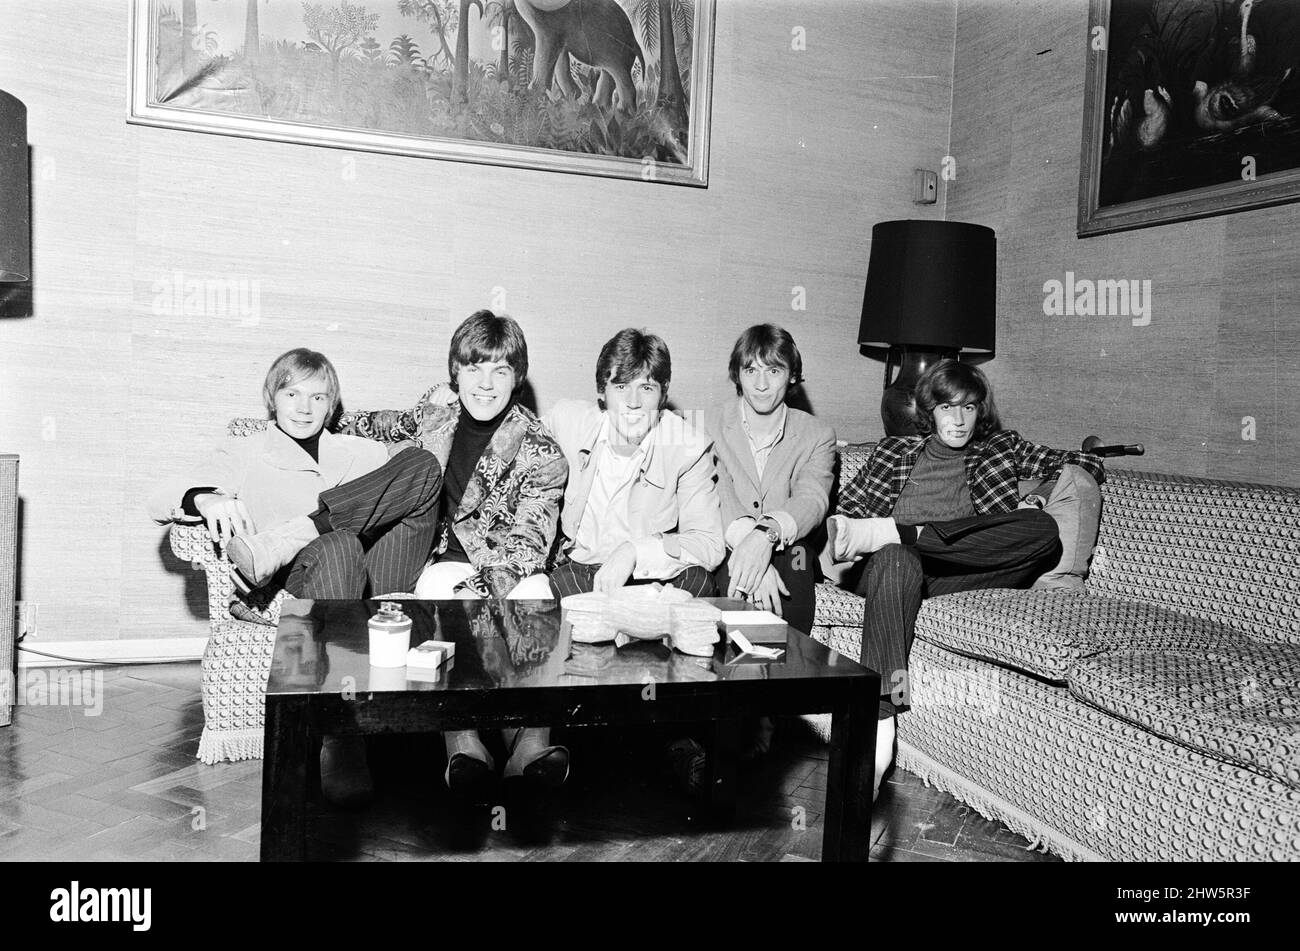 The Bee Gees seen here watching television in their hotel room 17th October 1967.   The Bee Gees is a 5 member group, comprising of Barry Gibb, Maurice Gibb, Robin Gibb, Colin Peterson & Vince Melouney *** Local Caption *** Colin Peterson  Vince Melouney Stock Photo